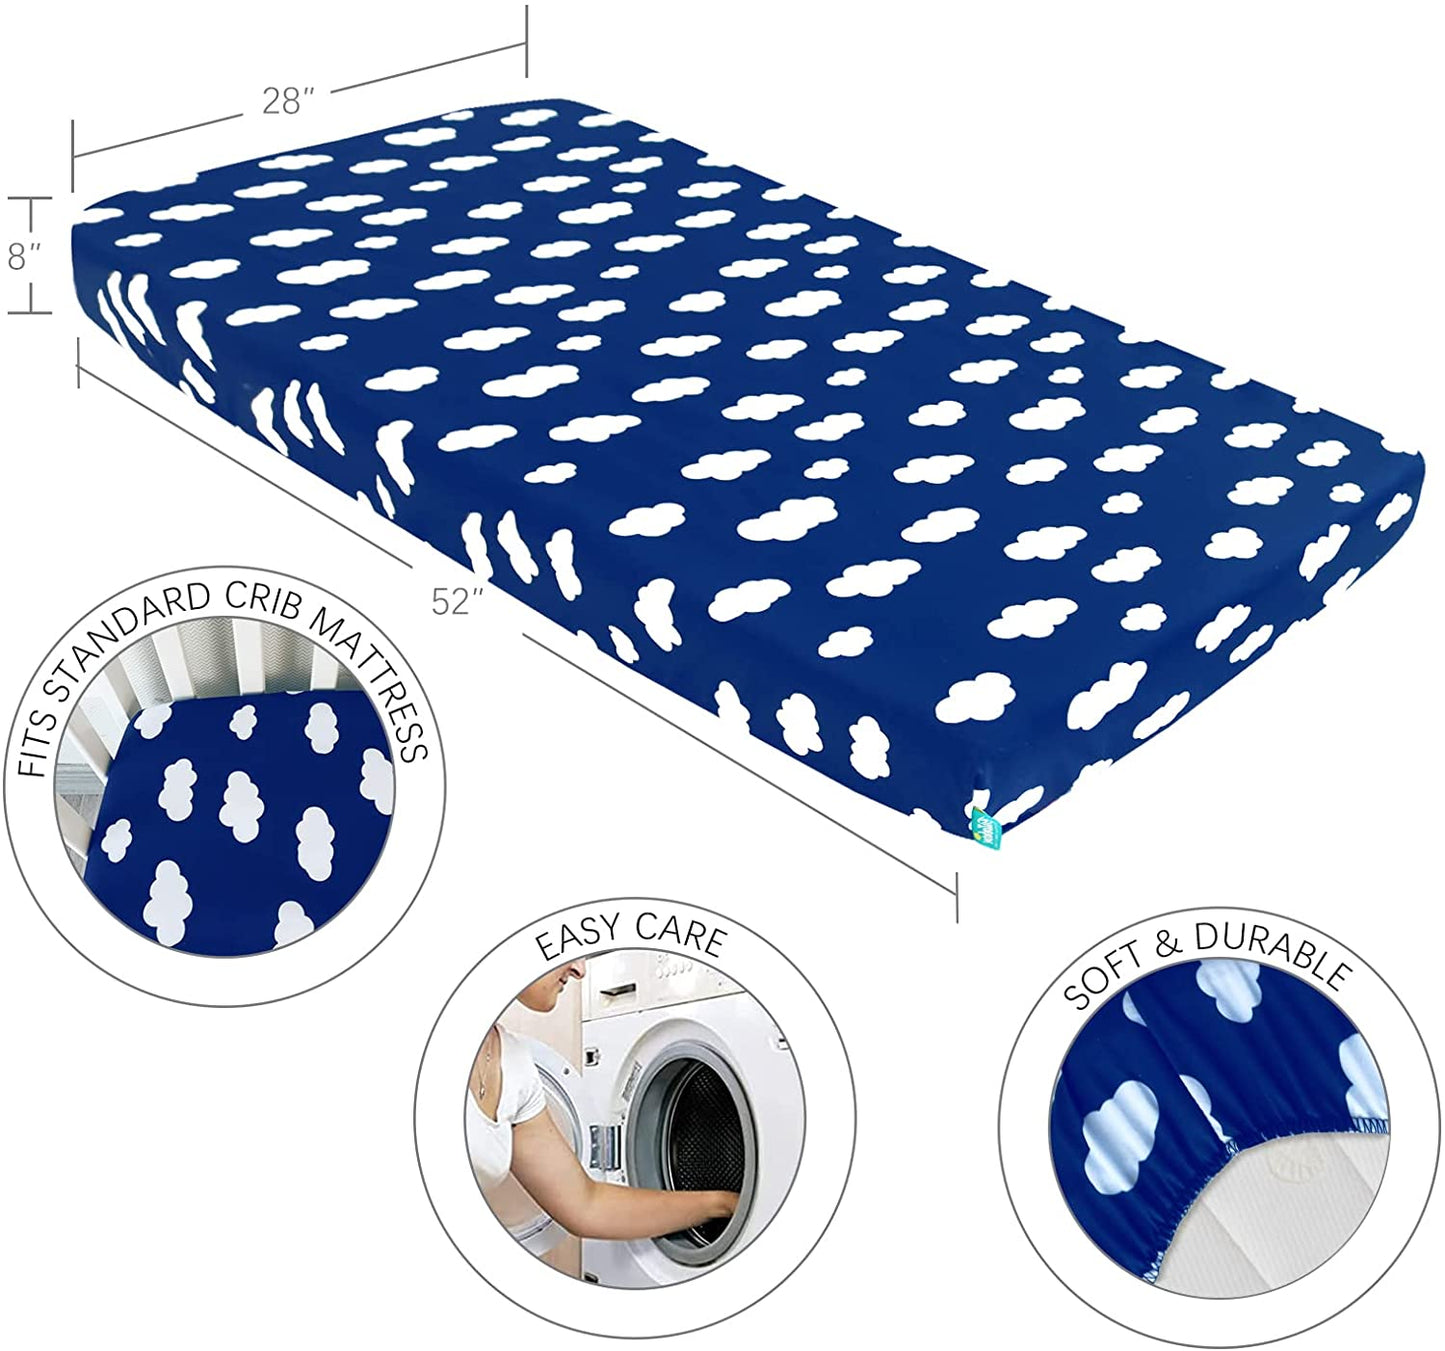 Toddler Bedding Set - 3 Pieces, Includes a Crib Fitted Sheet, Flat Sheet and Envelope Pillowcase, Soft and Breathable, Navy Cloud